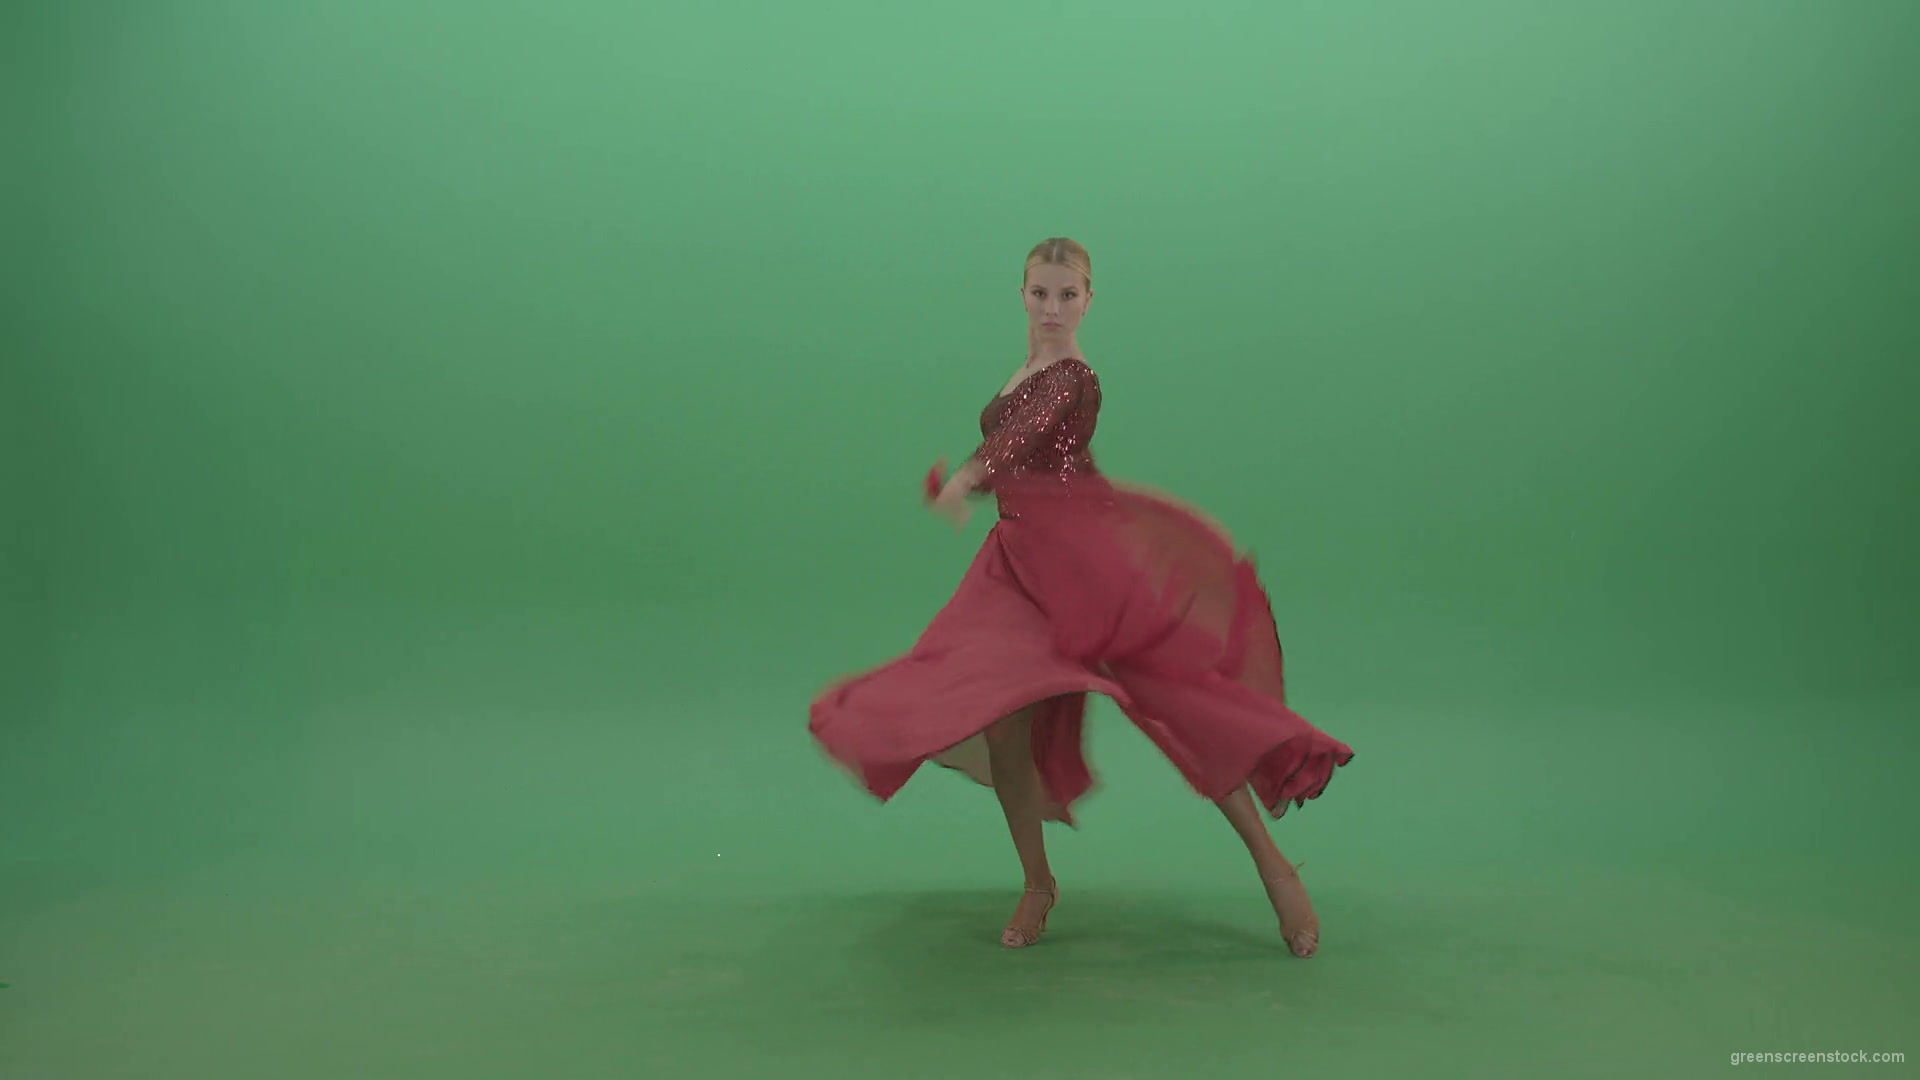 Passion-elegant-girl-in-red-dress-dancing-flamenco-isolated-on-green-screen-4K-Video-Footage-1920_006 Green Screen Stock